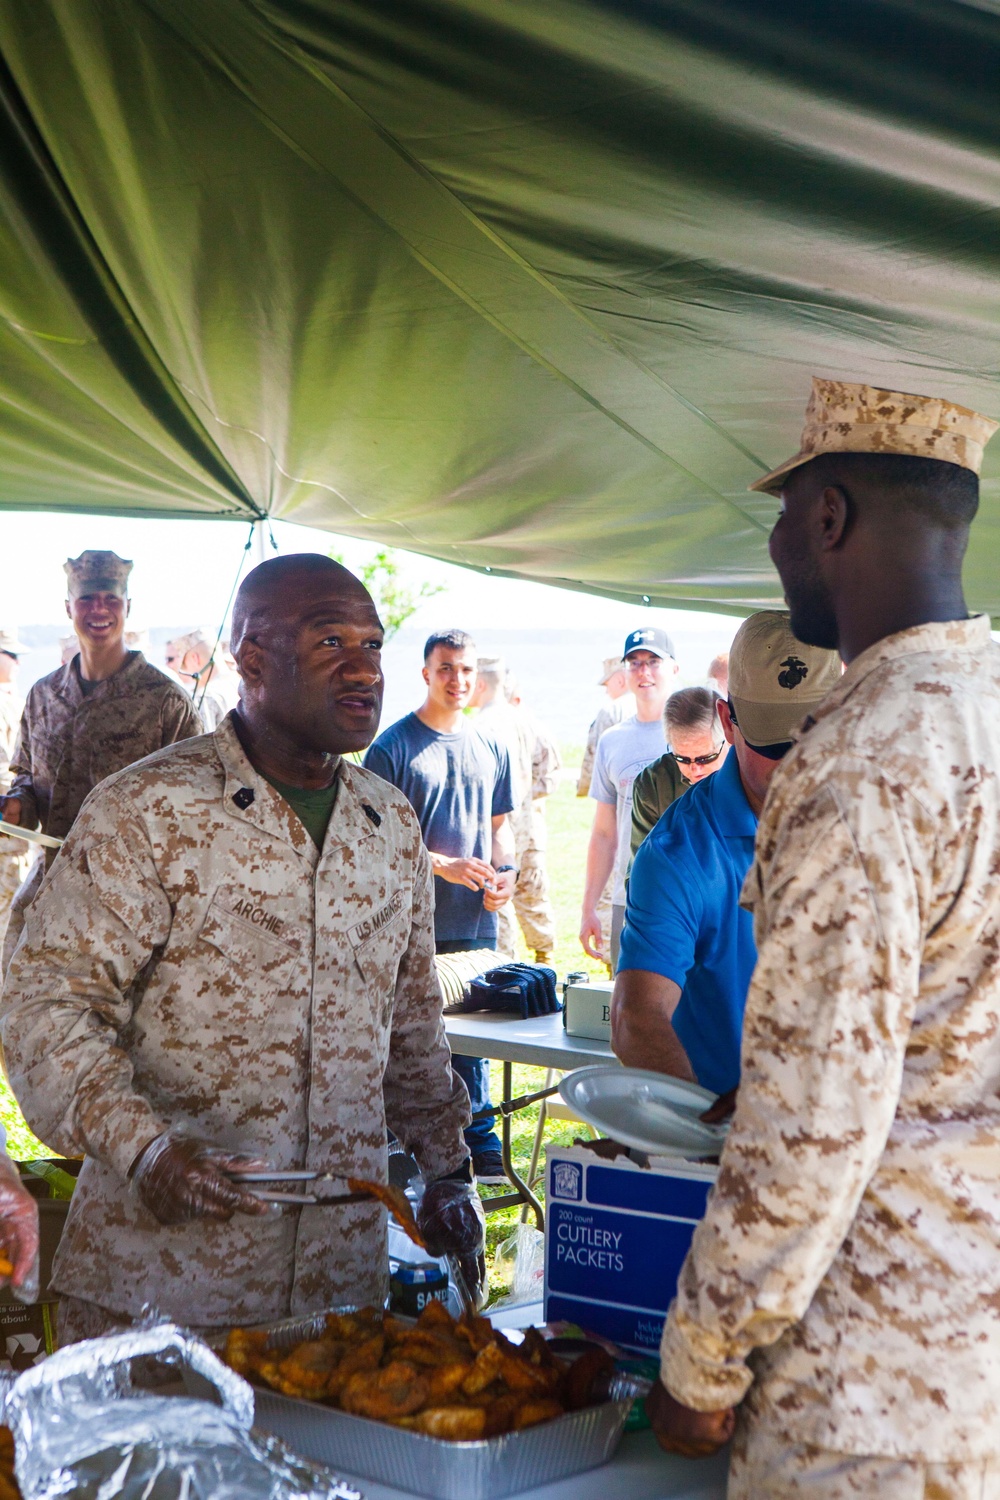 Military Affairs Committee gives back to Marines in annual fish fry